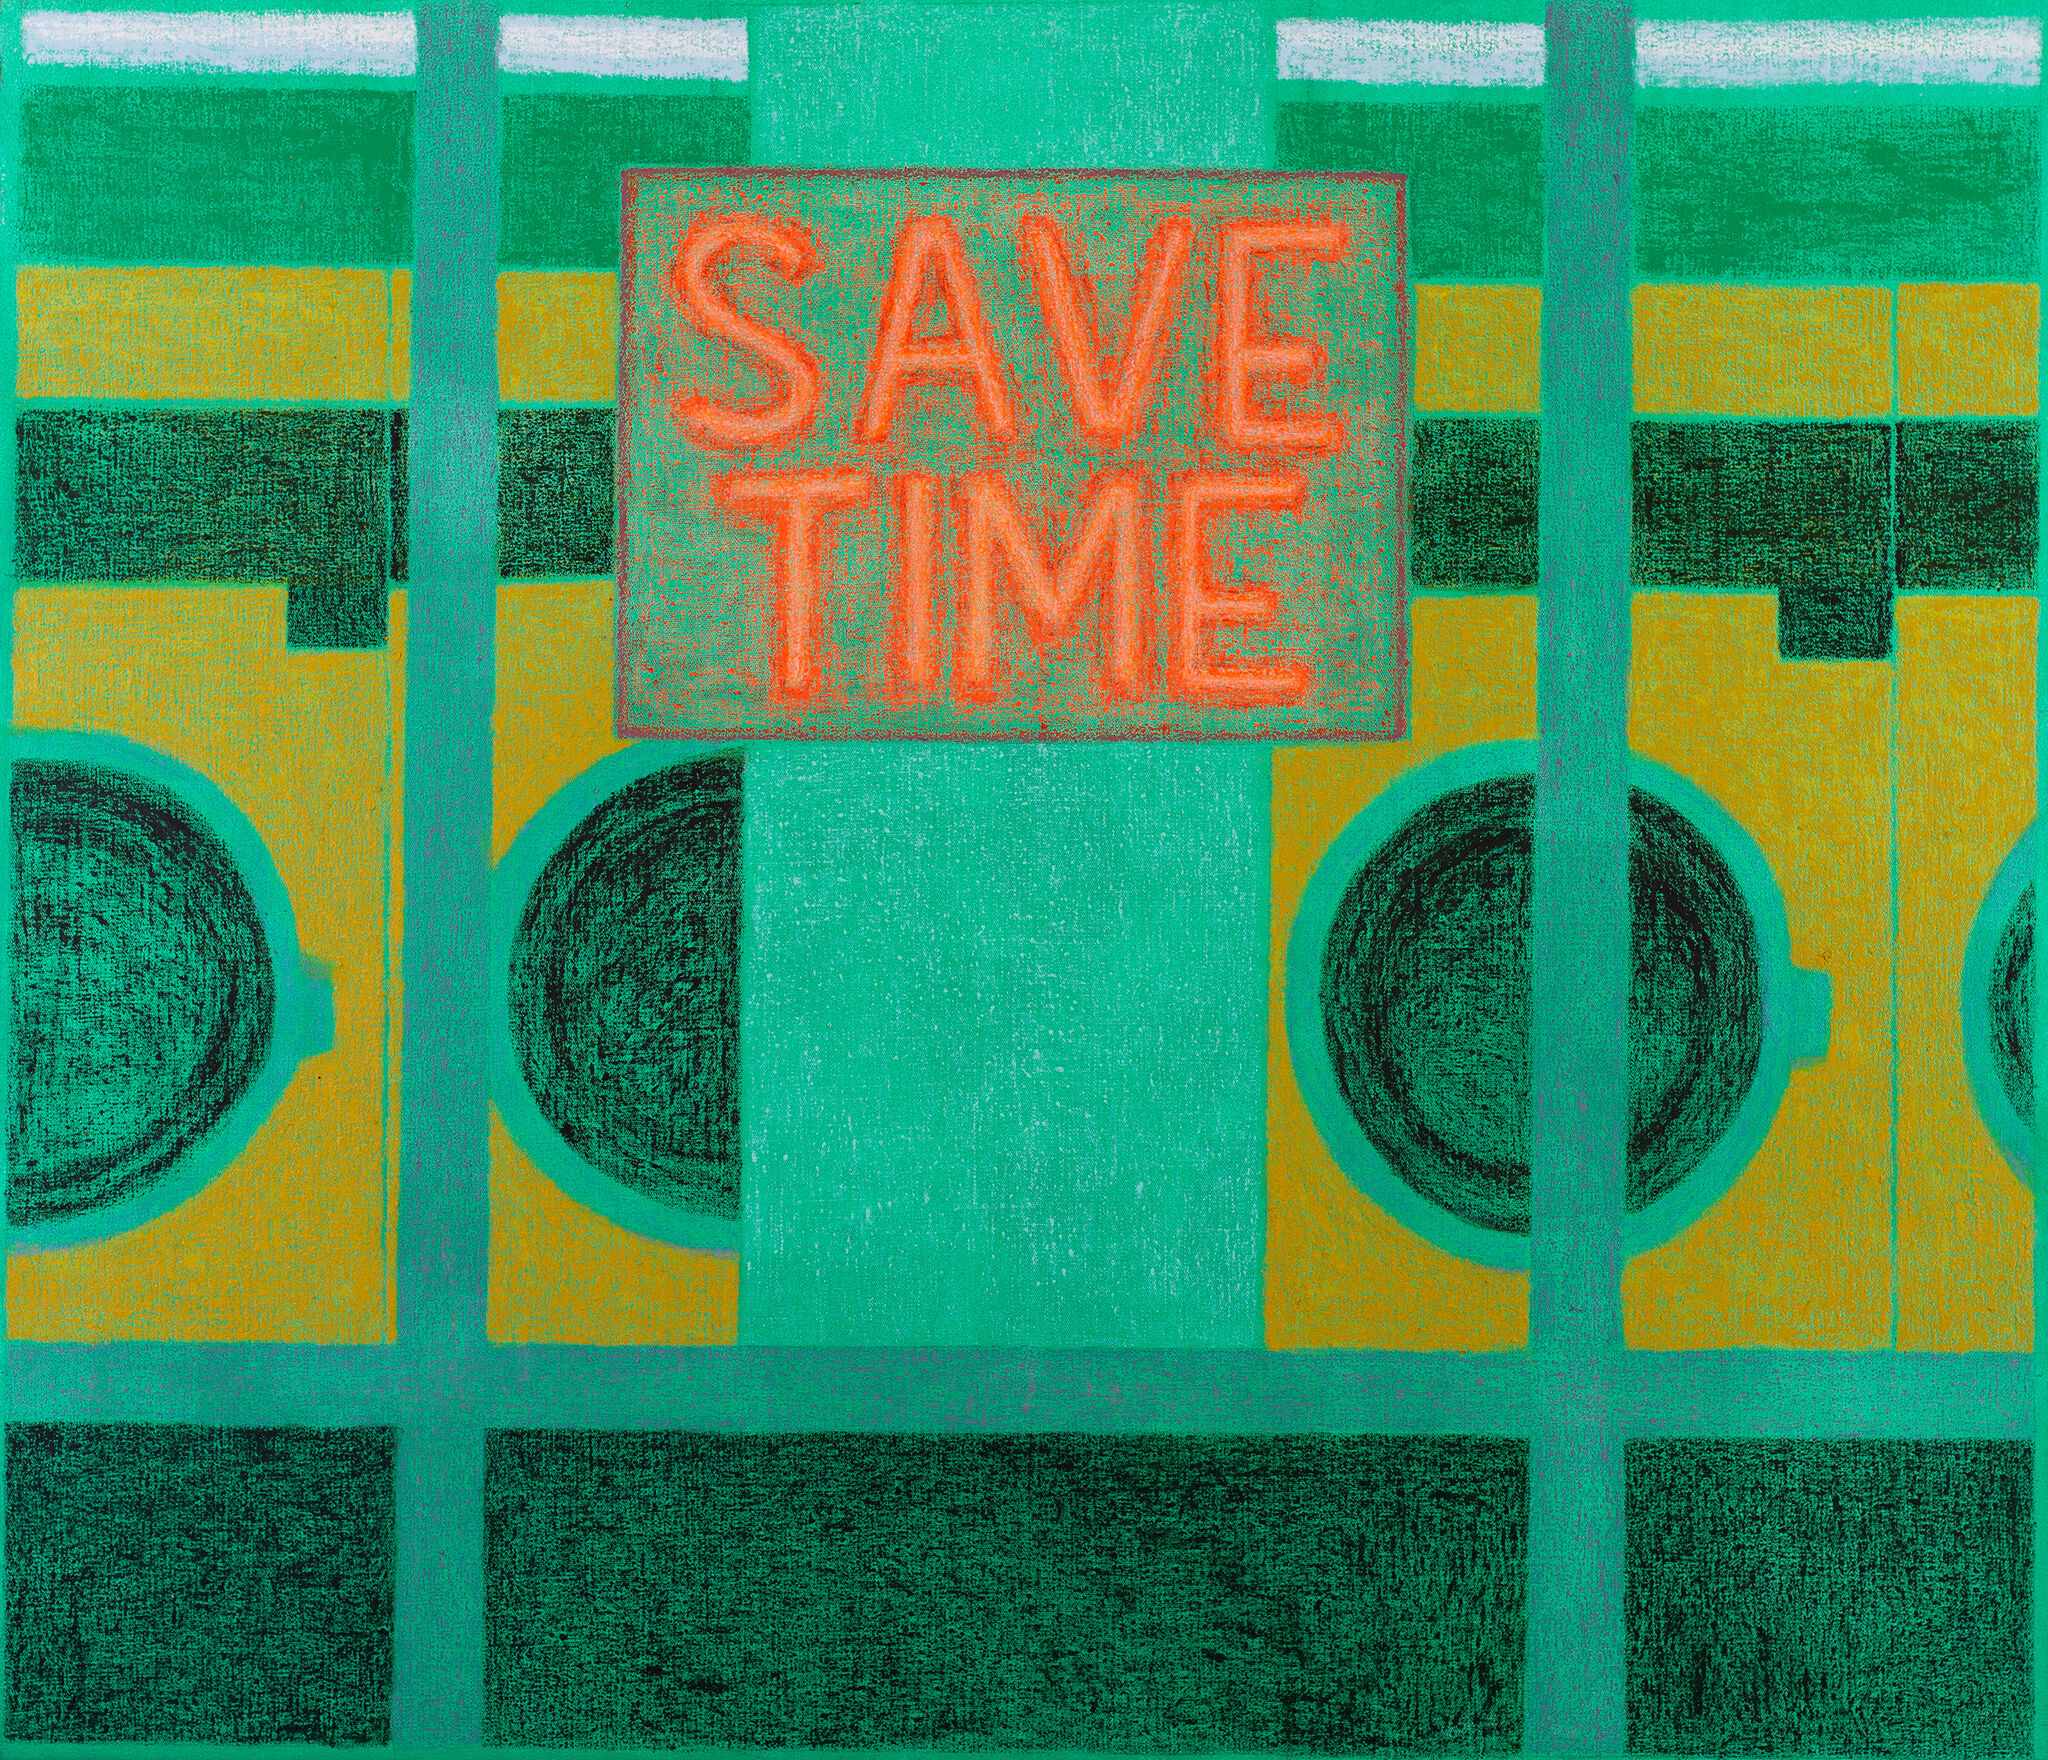 Green-and-yellow geometric canvas with the words "Save Time" in bright red letters on a sign in the top center of the composition.